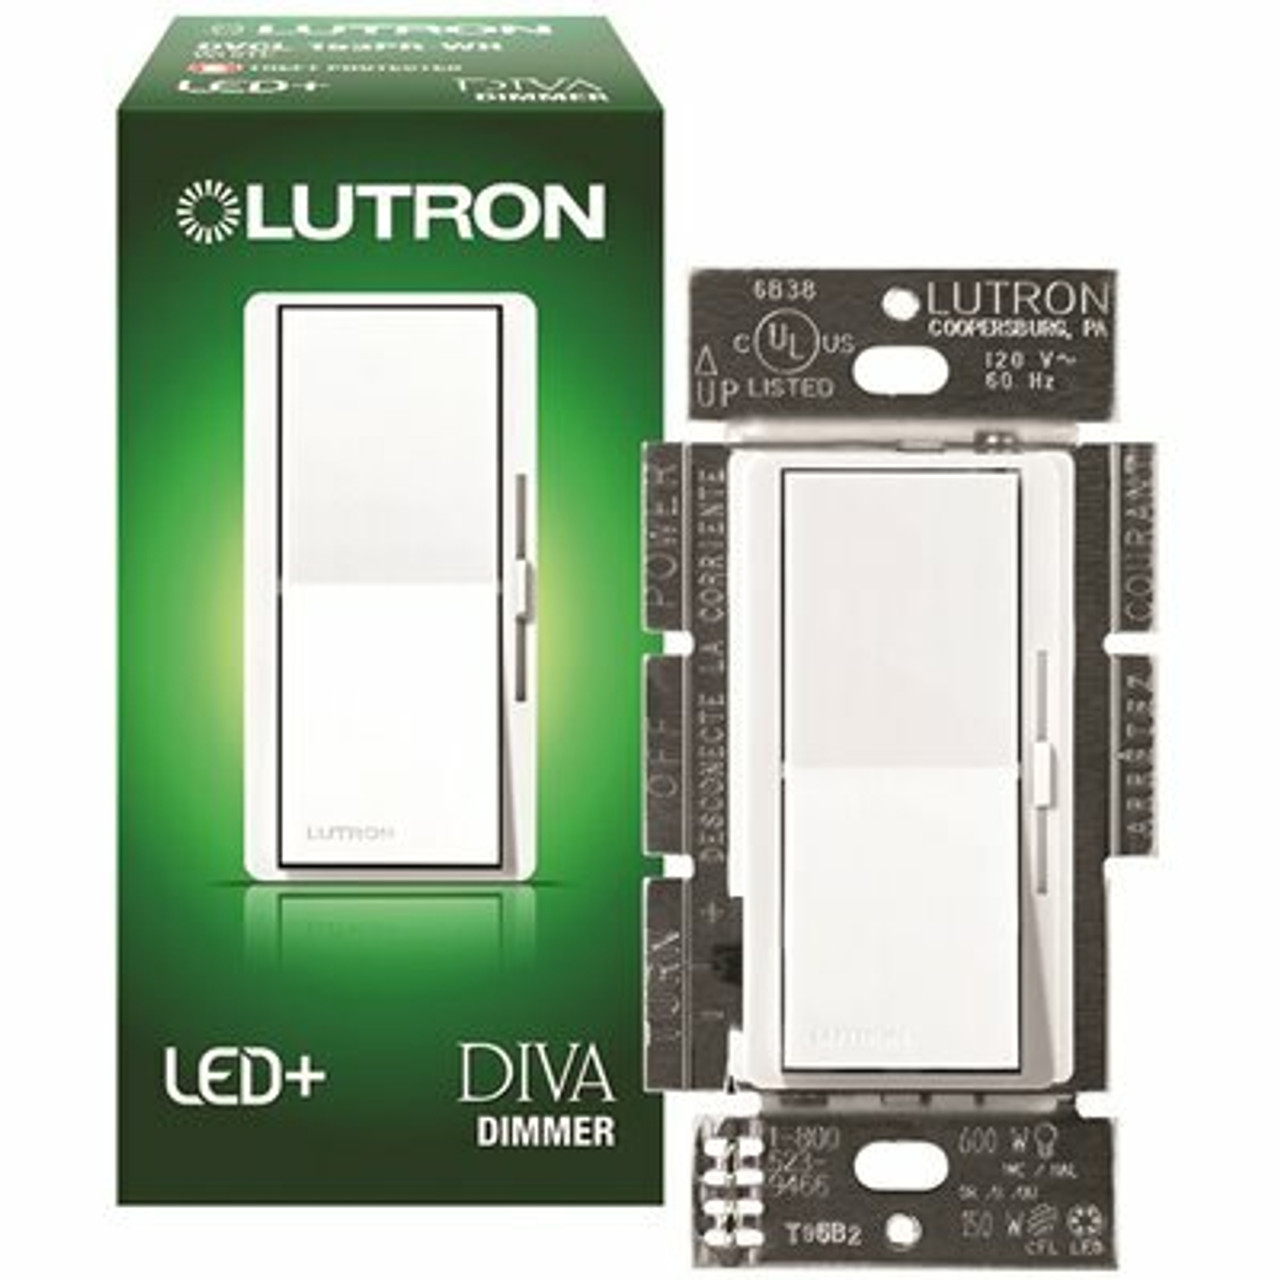 Lutron Single-Pole Or 3-Way Diva Led+ Dimmer Switch For Dimmable Led, Halogen And Incandescent Bulbs, White